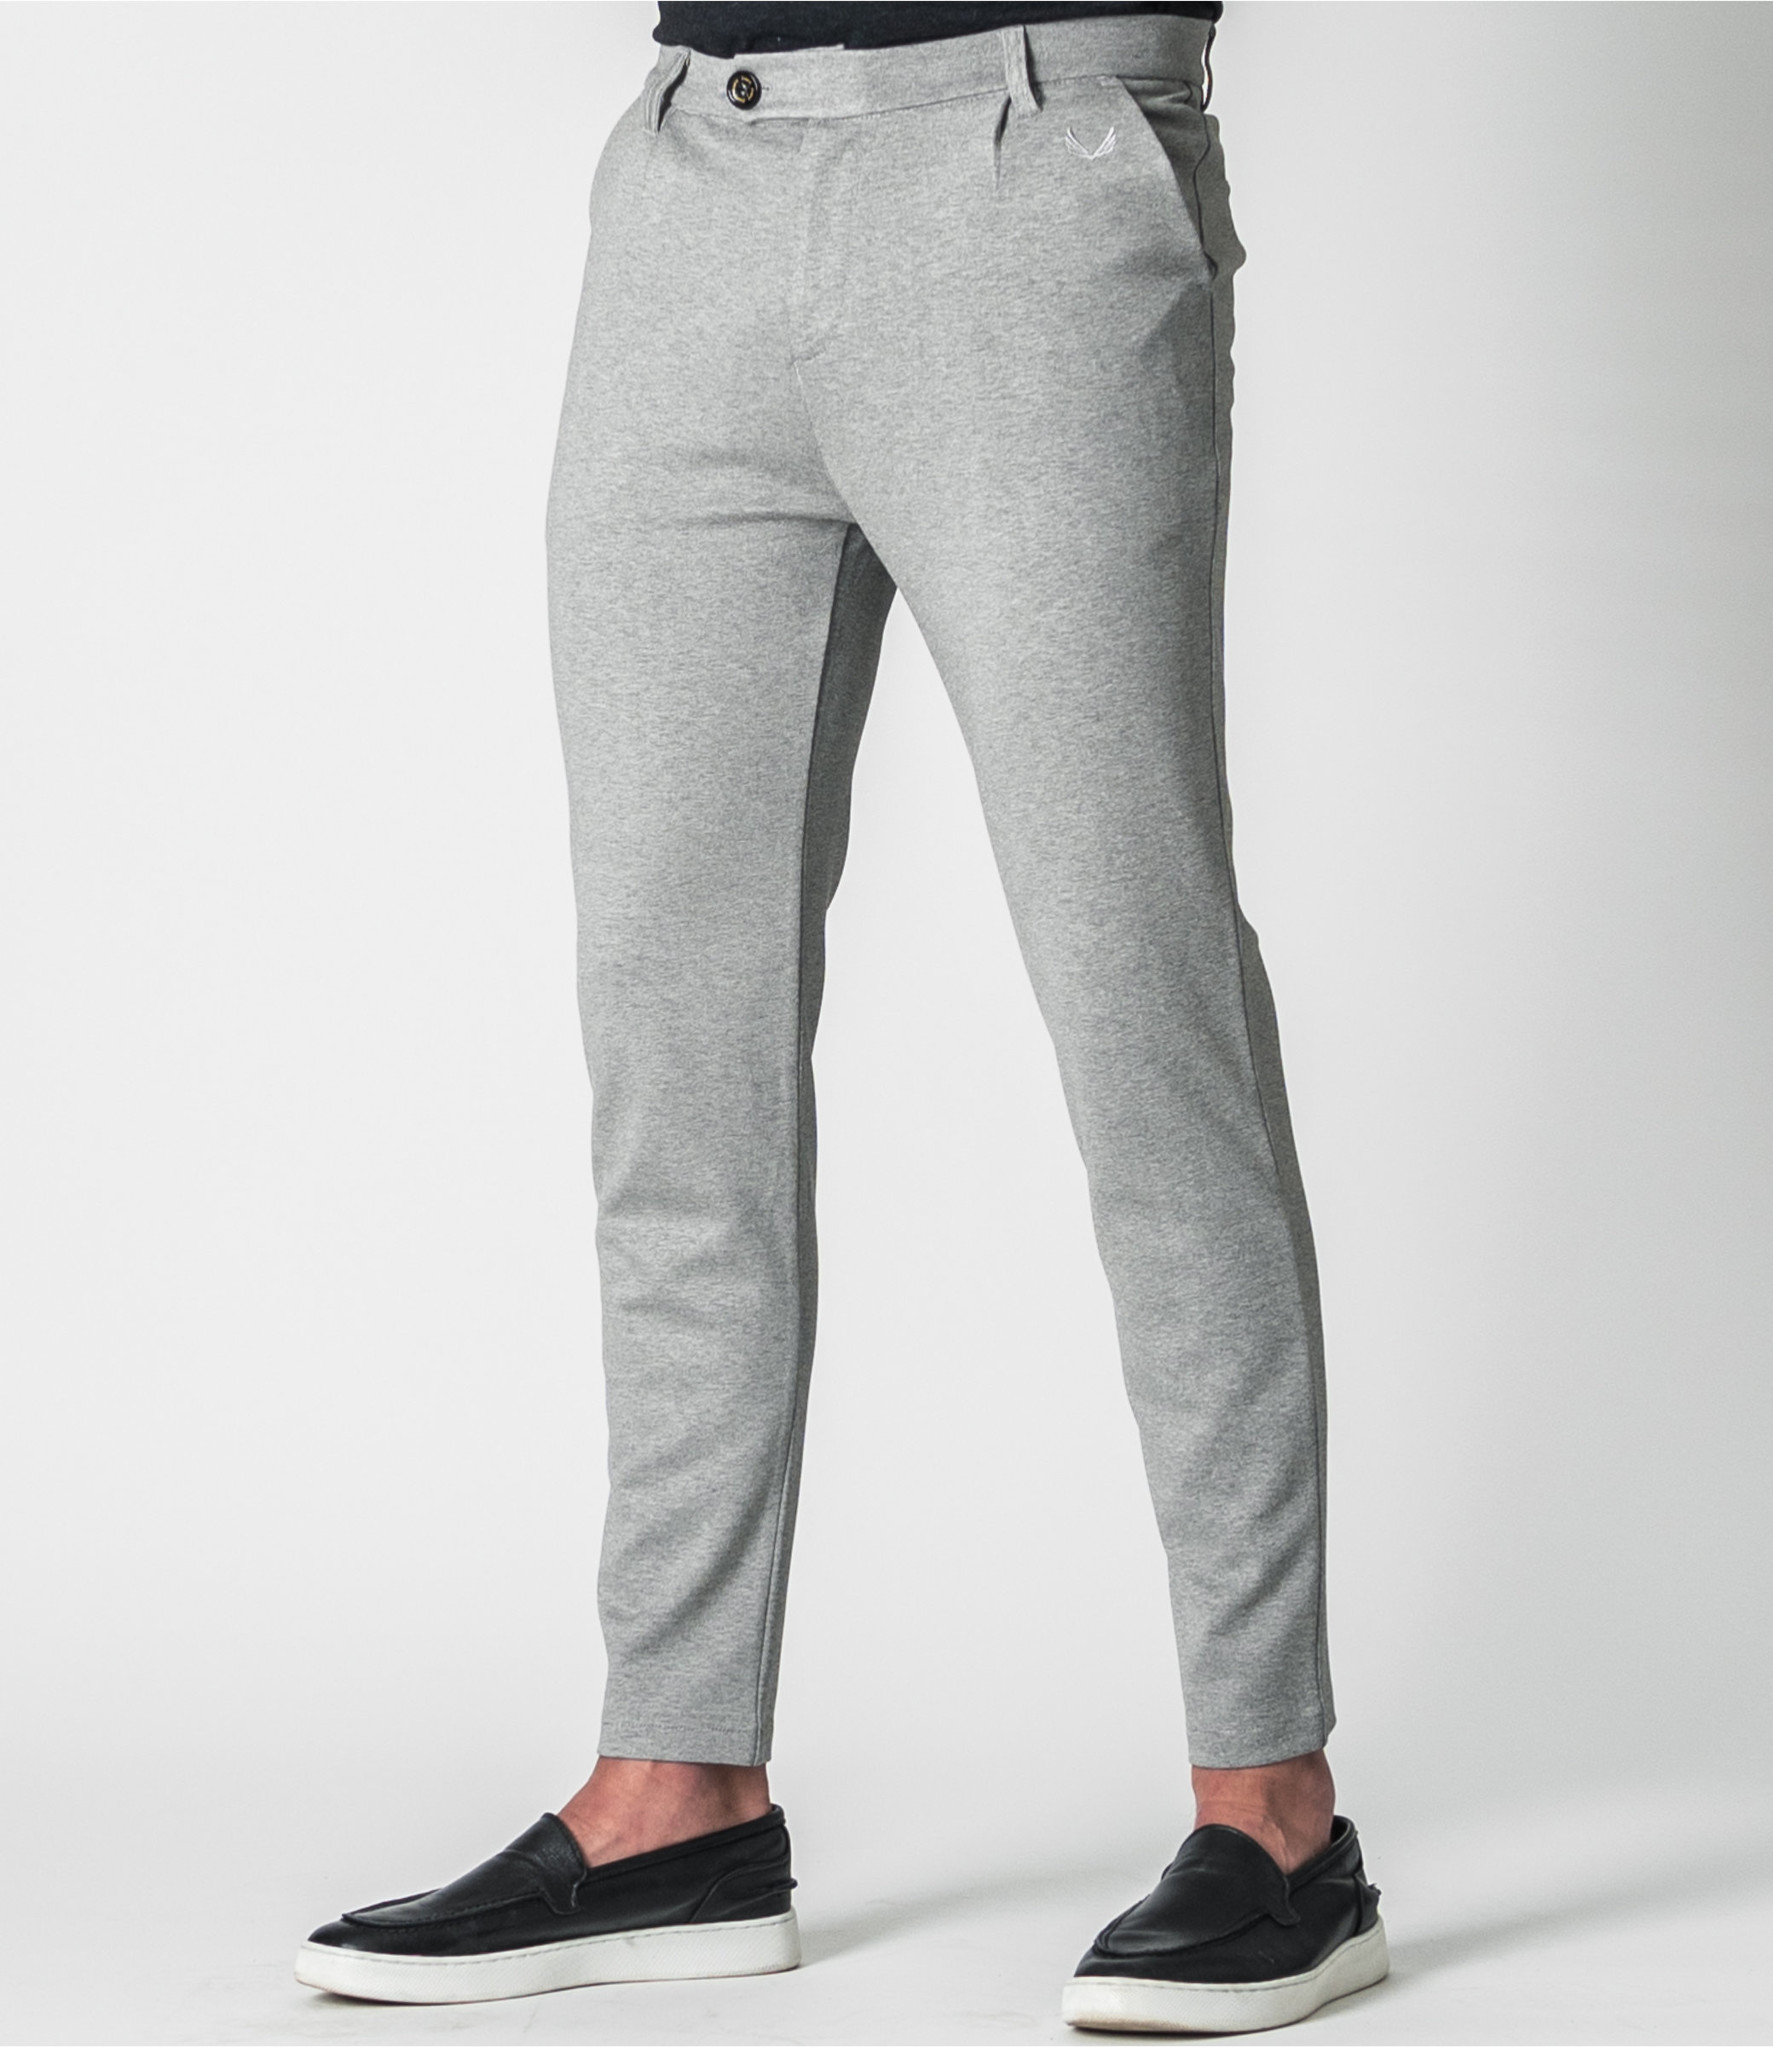 Max & Co - Charcoal trousers MELISSA buy at Symbol